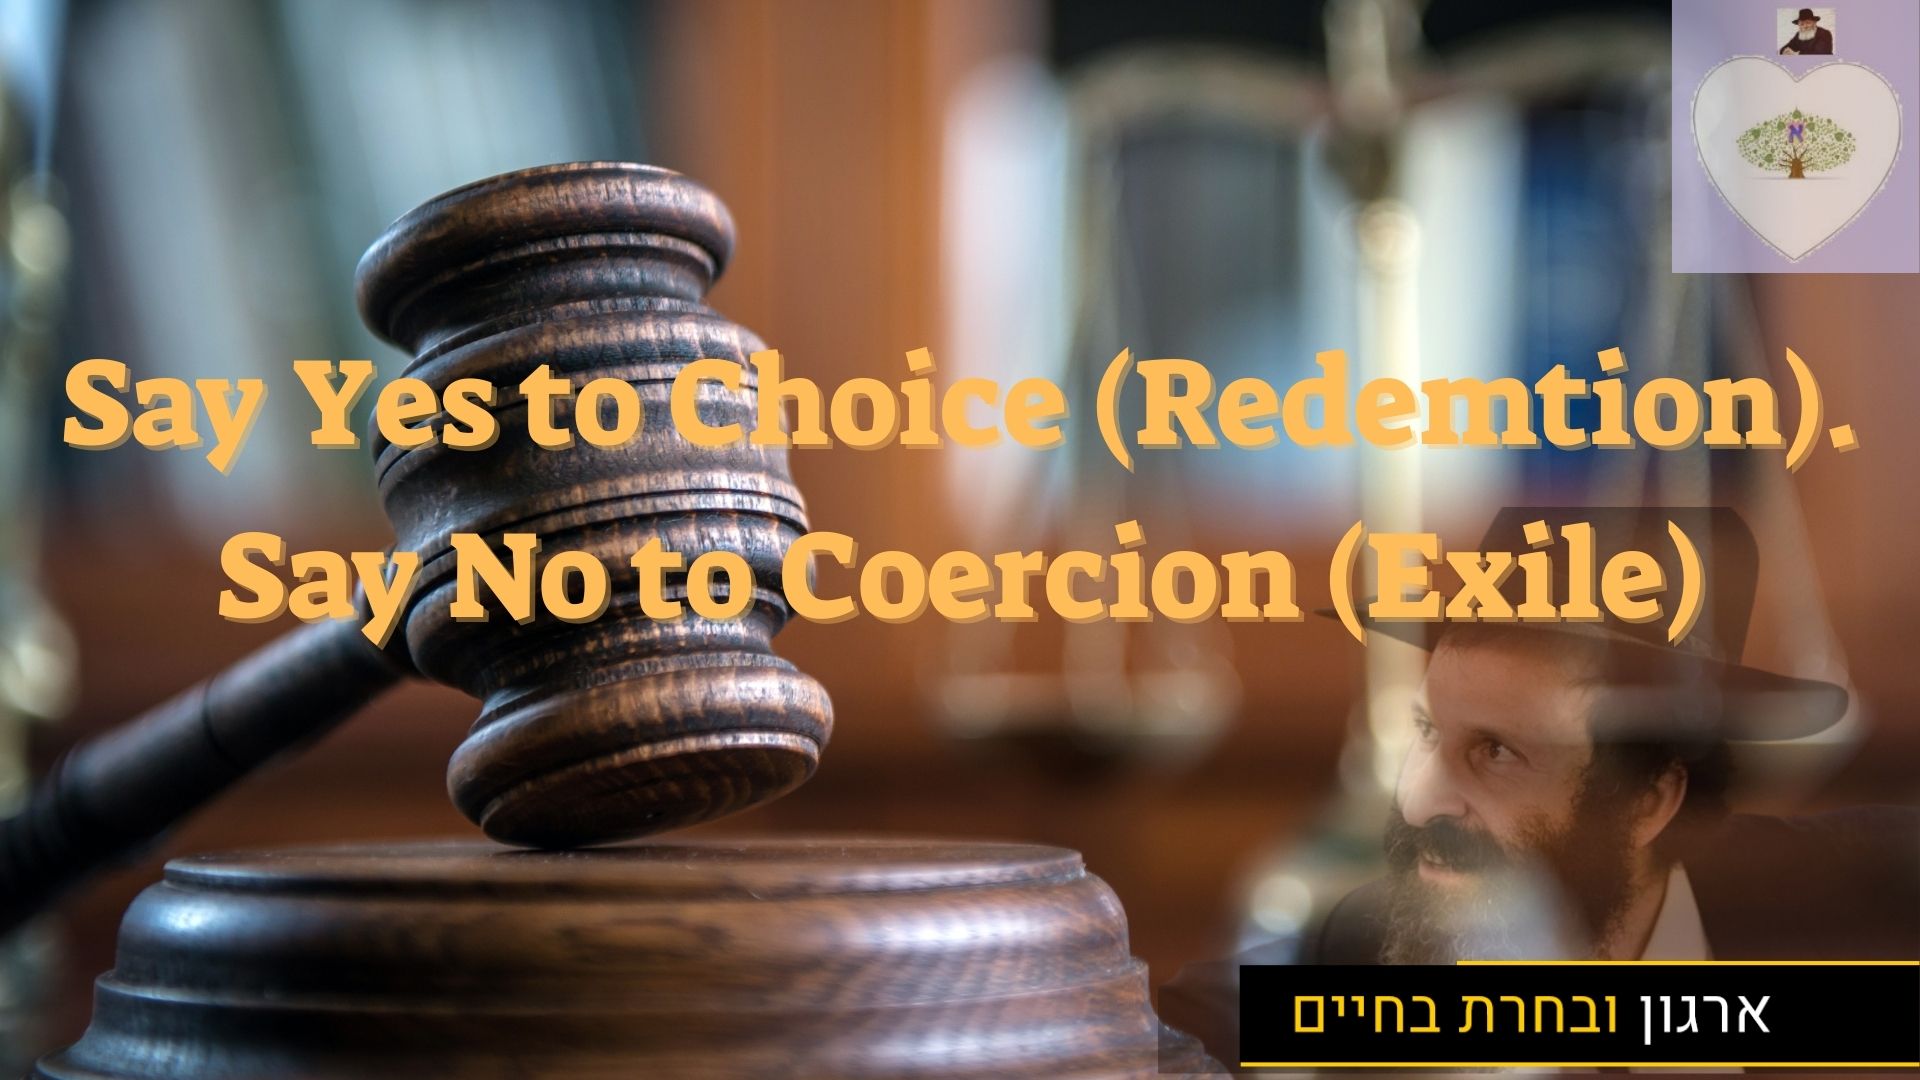 Say Yes to Choice (Redemtion). Say No to Coercion (Exile)